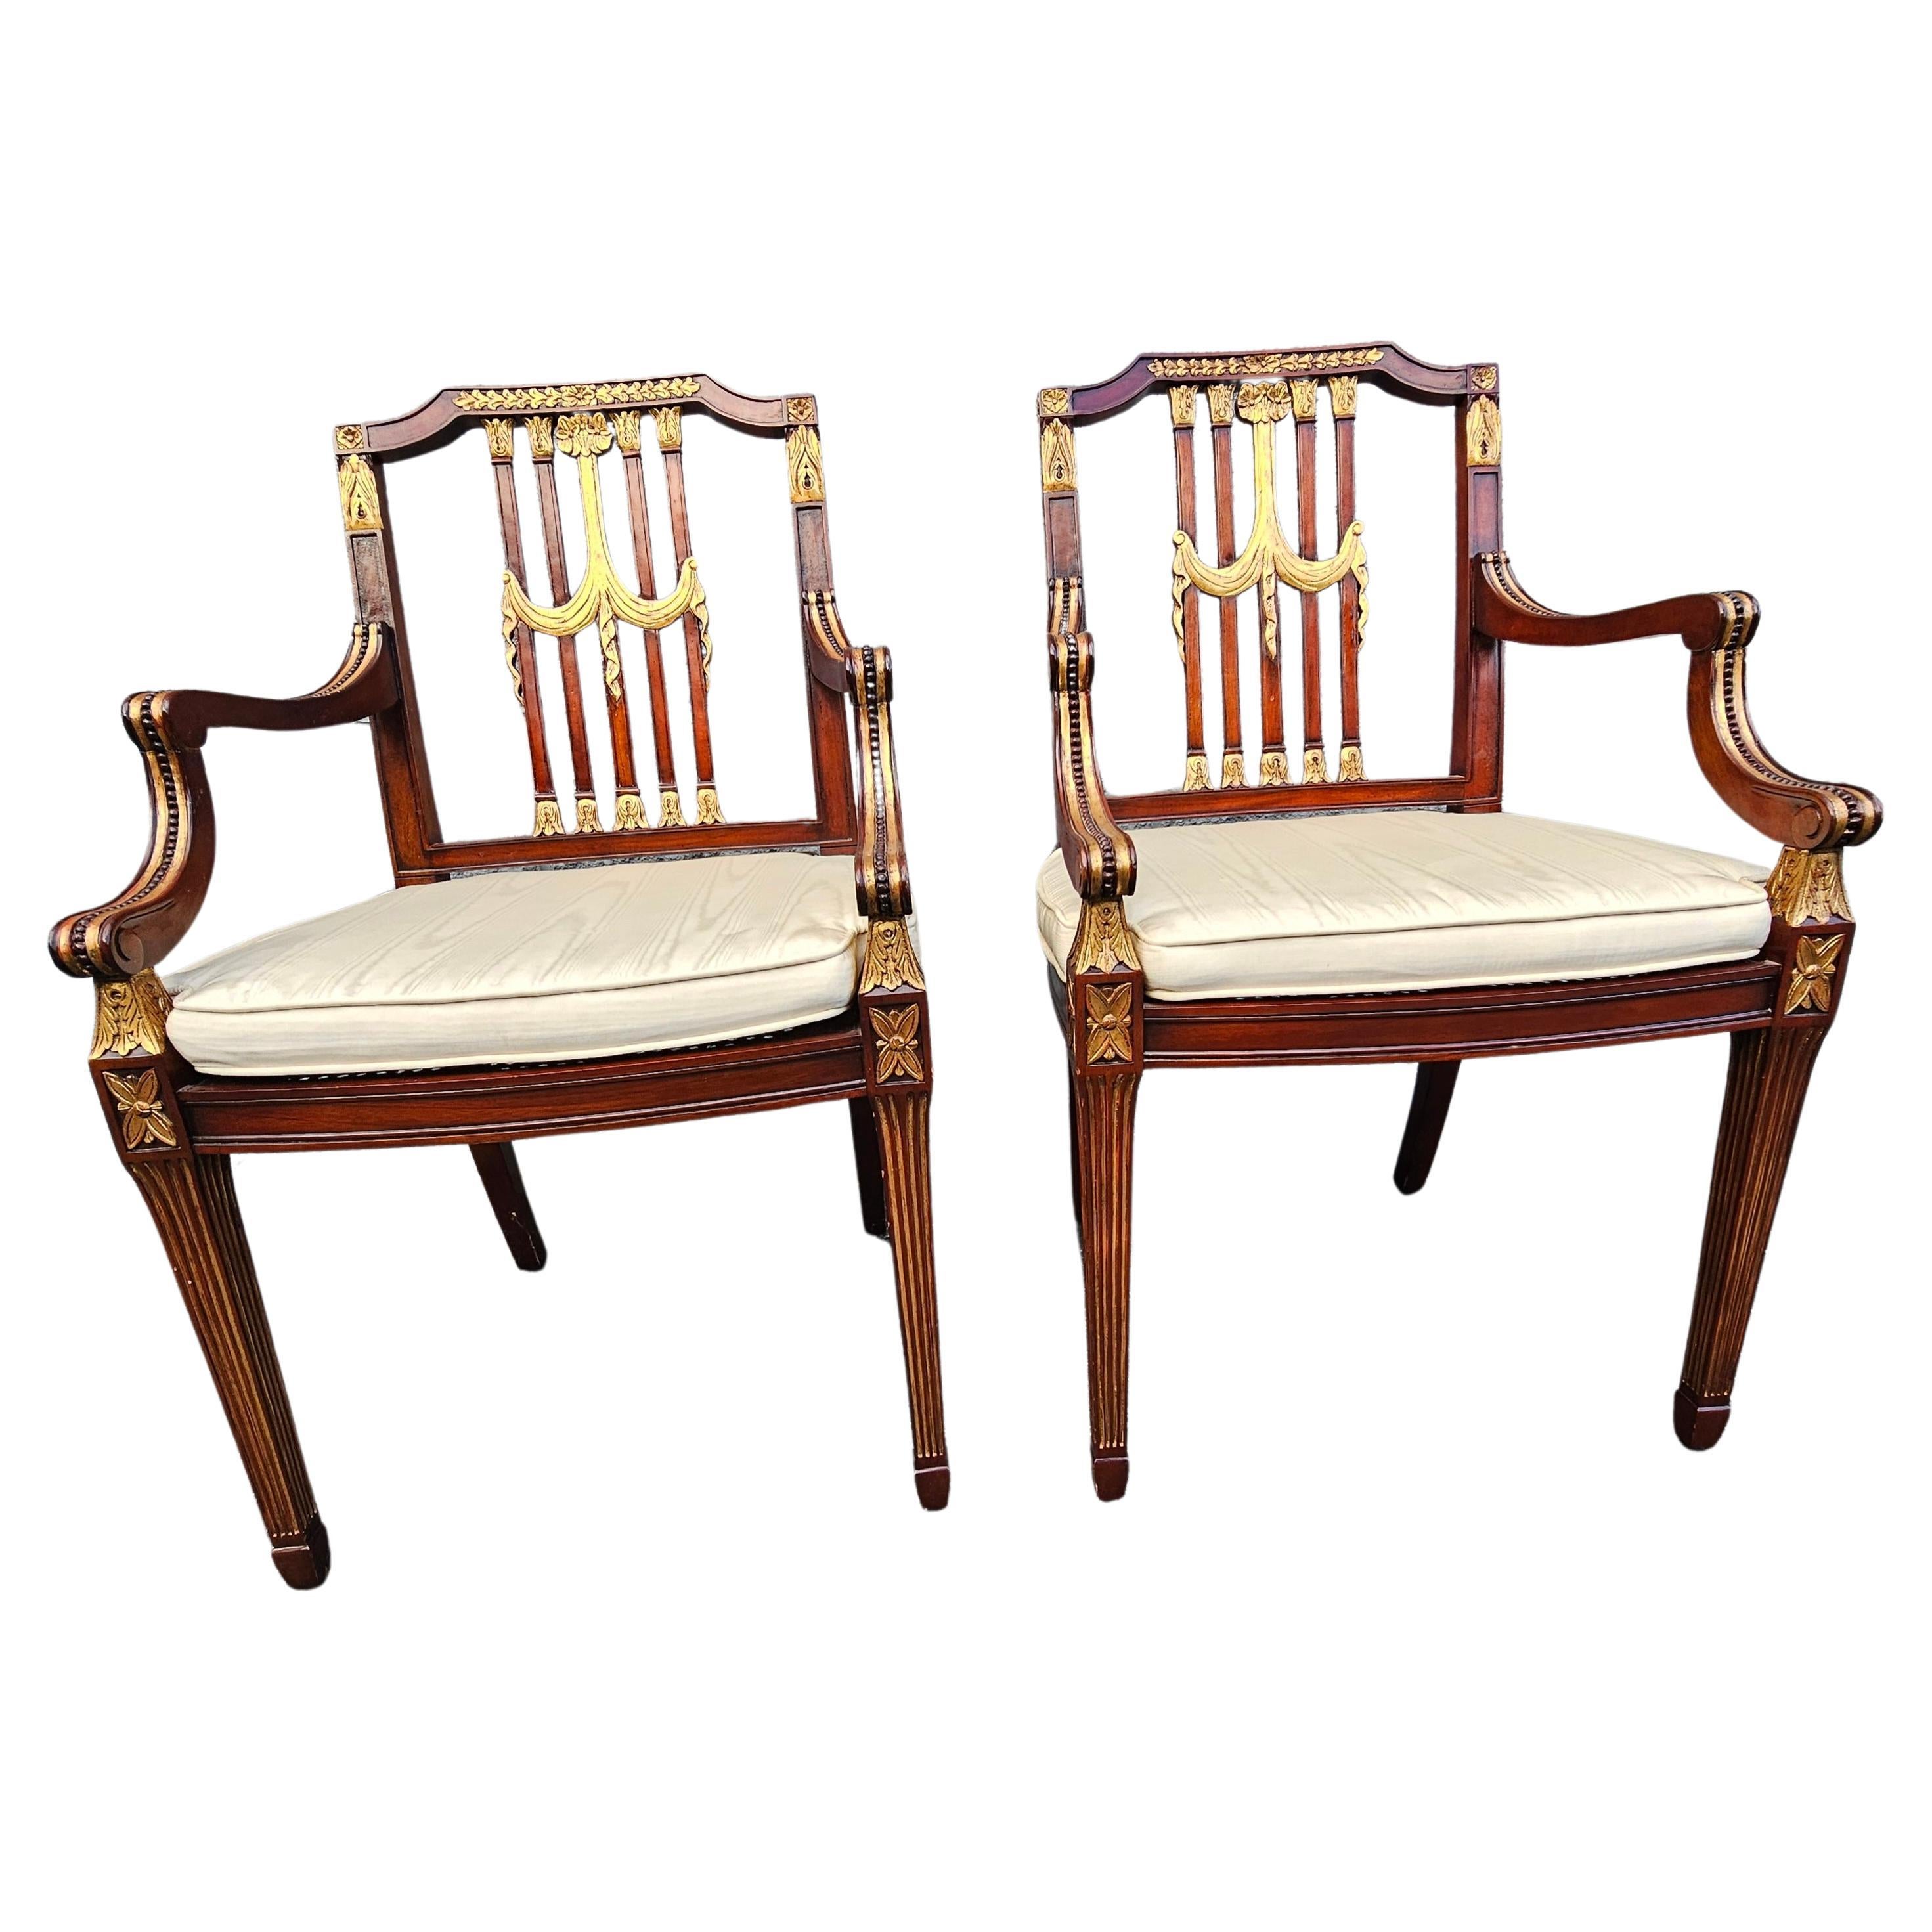 A Pair of Maitland Smith Parcel Gilt Mahogany and Swag Shield Back with Cane Seat Armchairs with original zipped and loose seat cushions. Excellent condition. No stains.